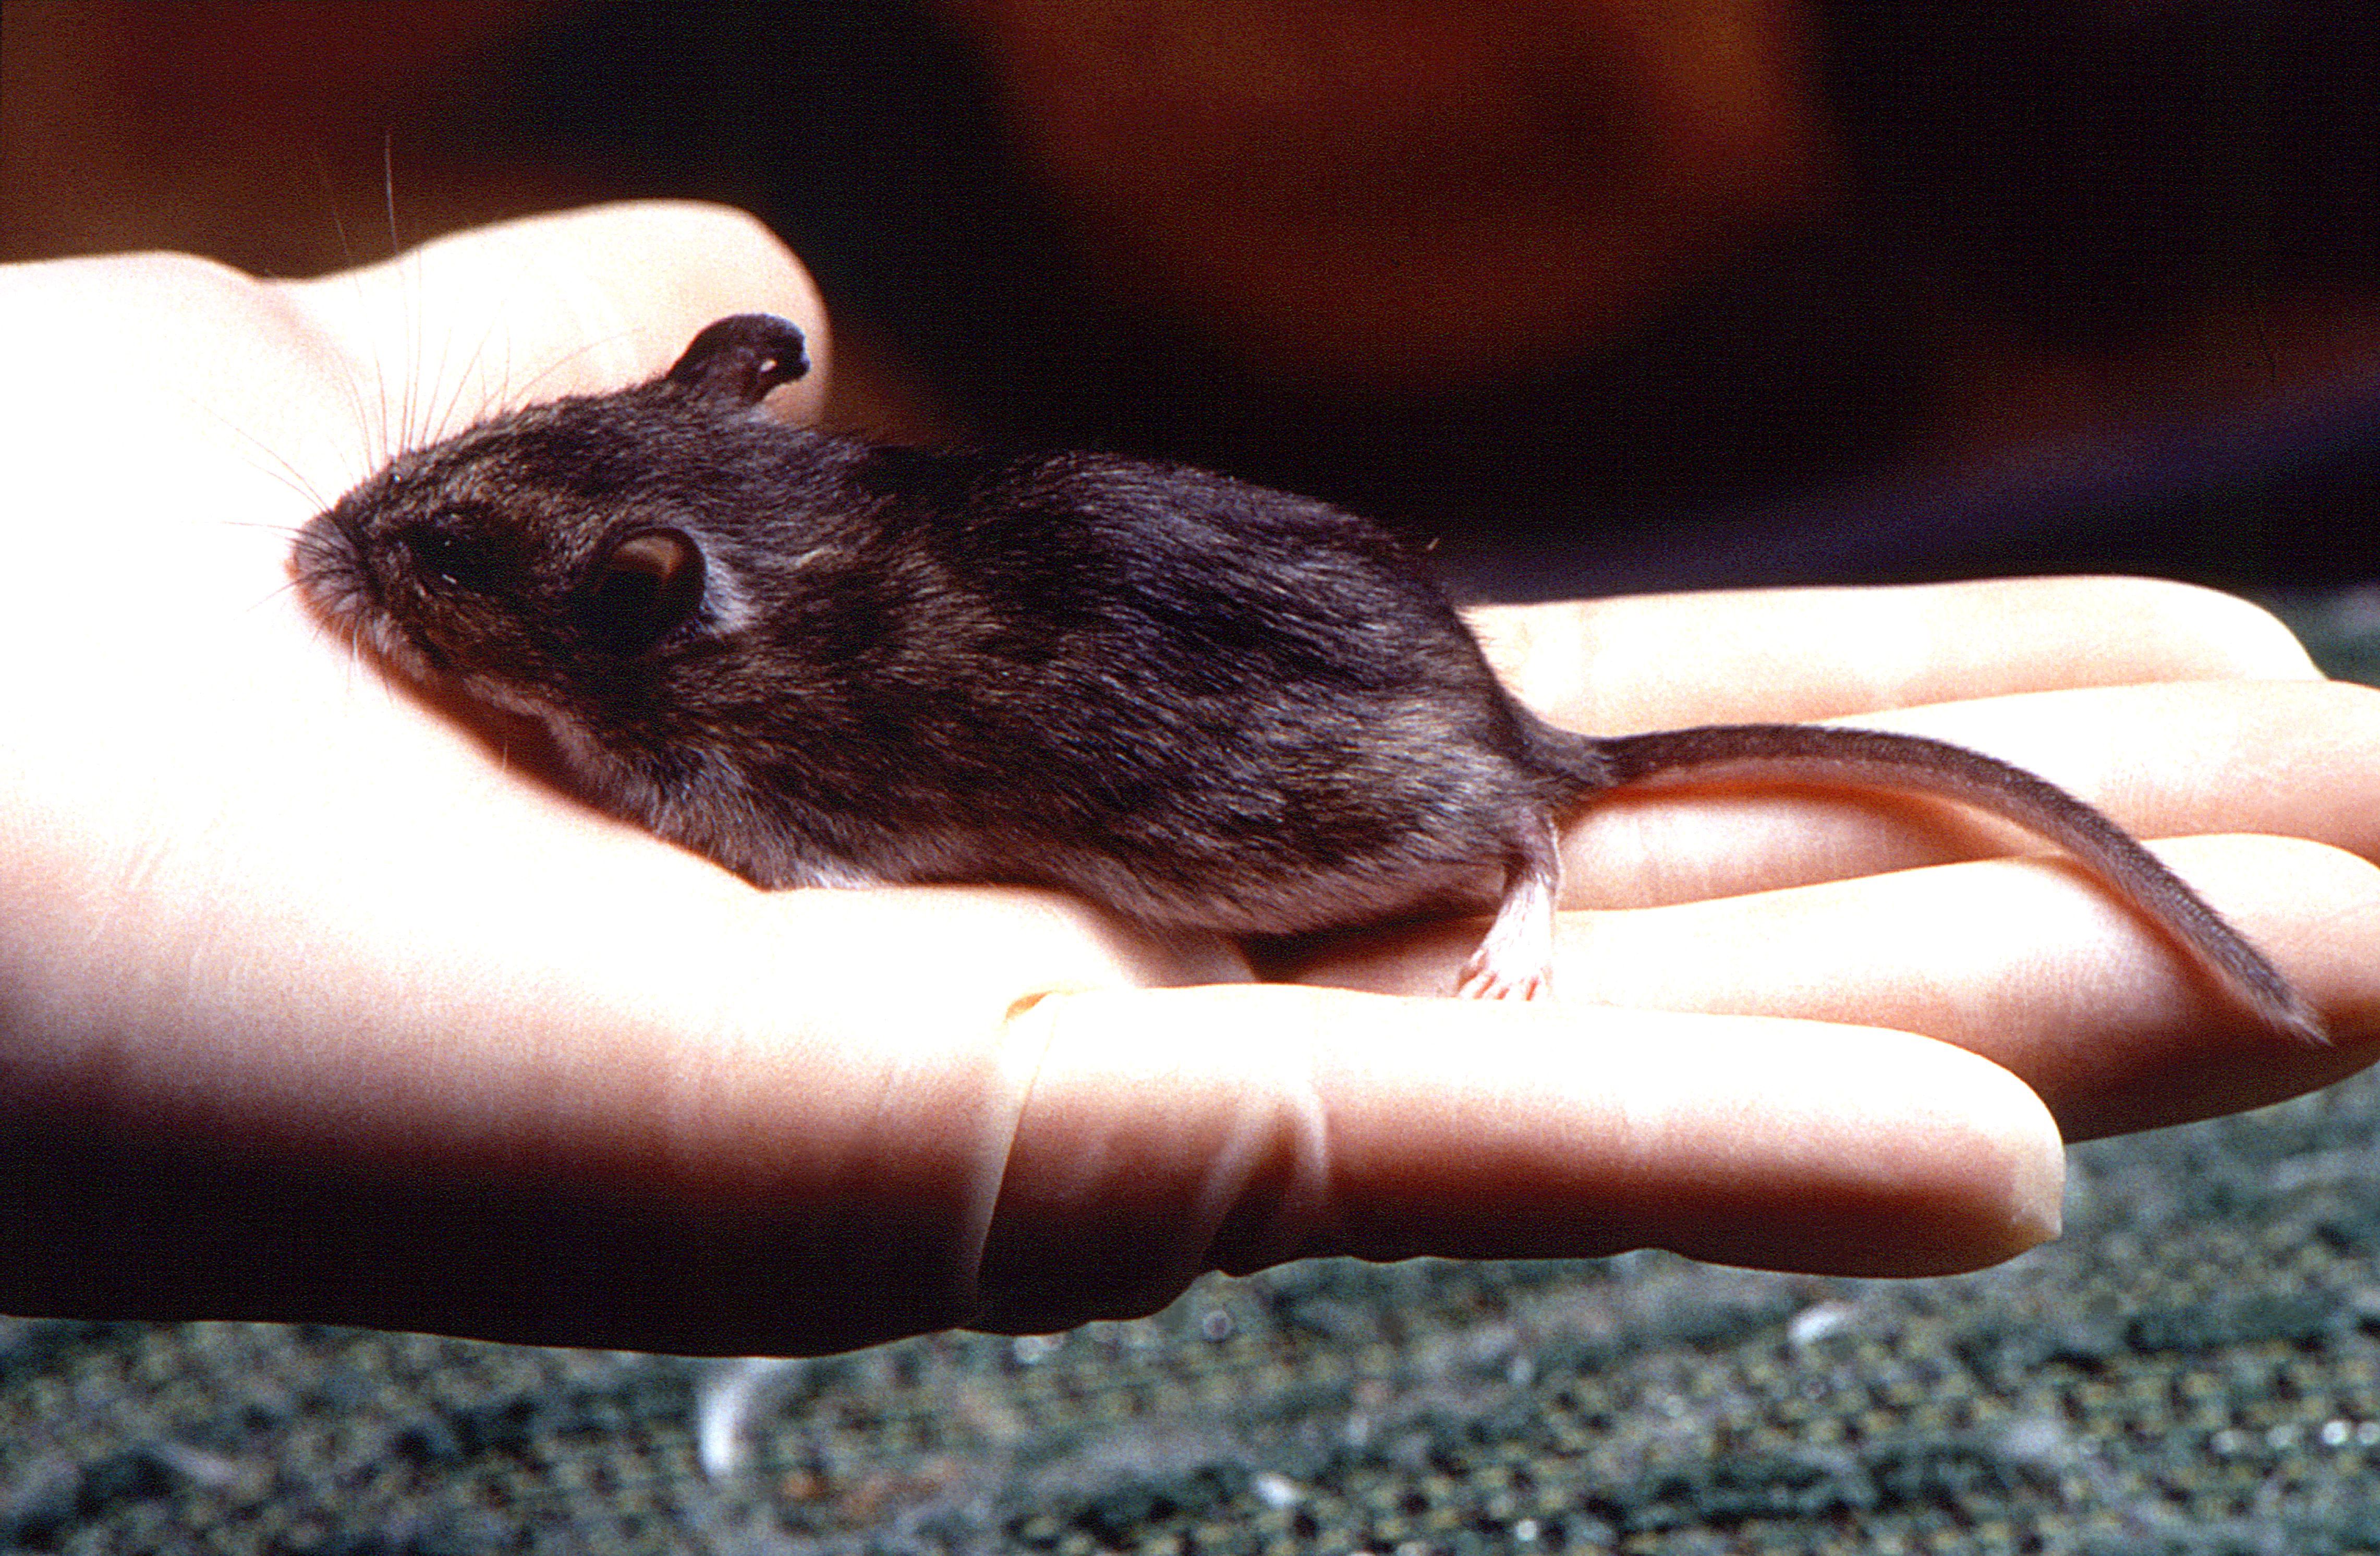 Sterile latex gloved hand holding an unknown specie of deer mouse